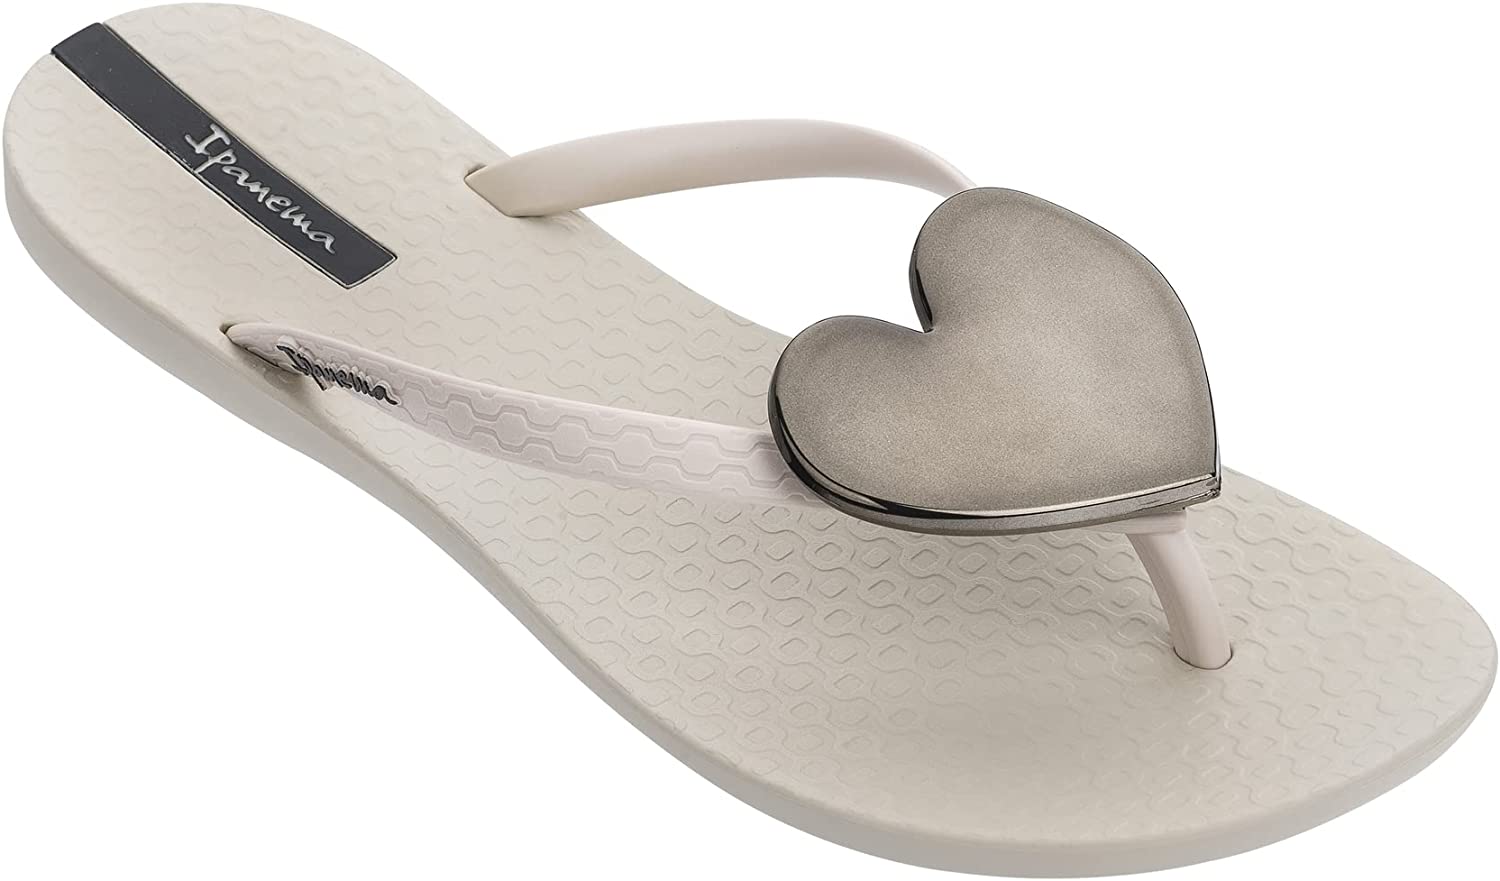 Ipanema Sandals Relaunches in US With New Wholesale & Retail Strategy